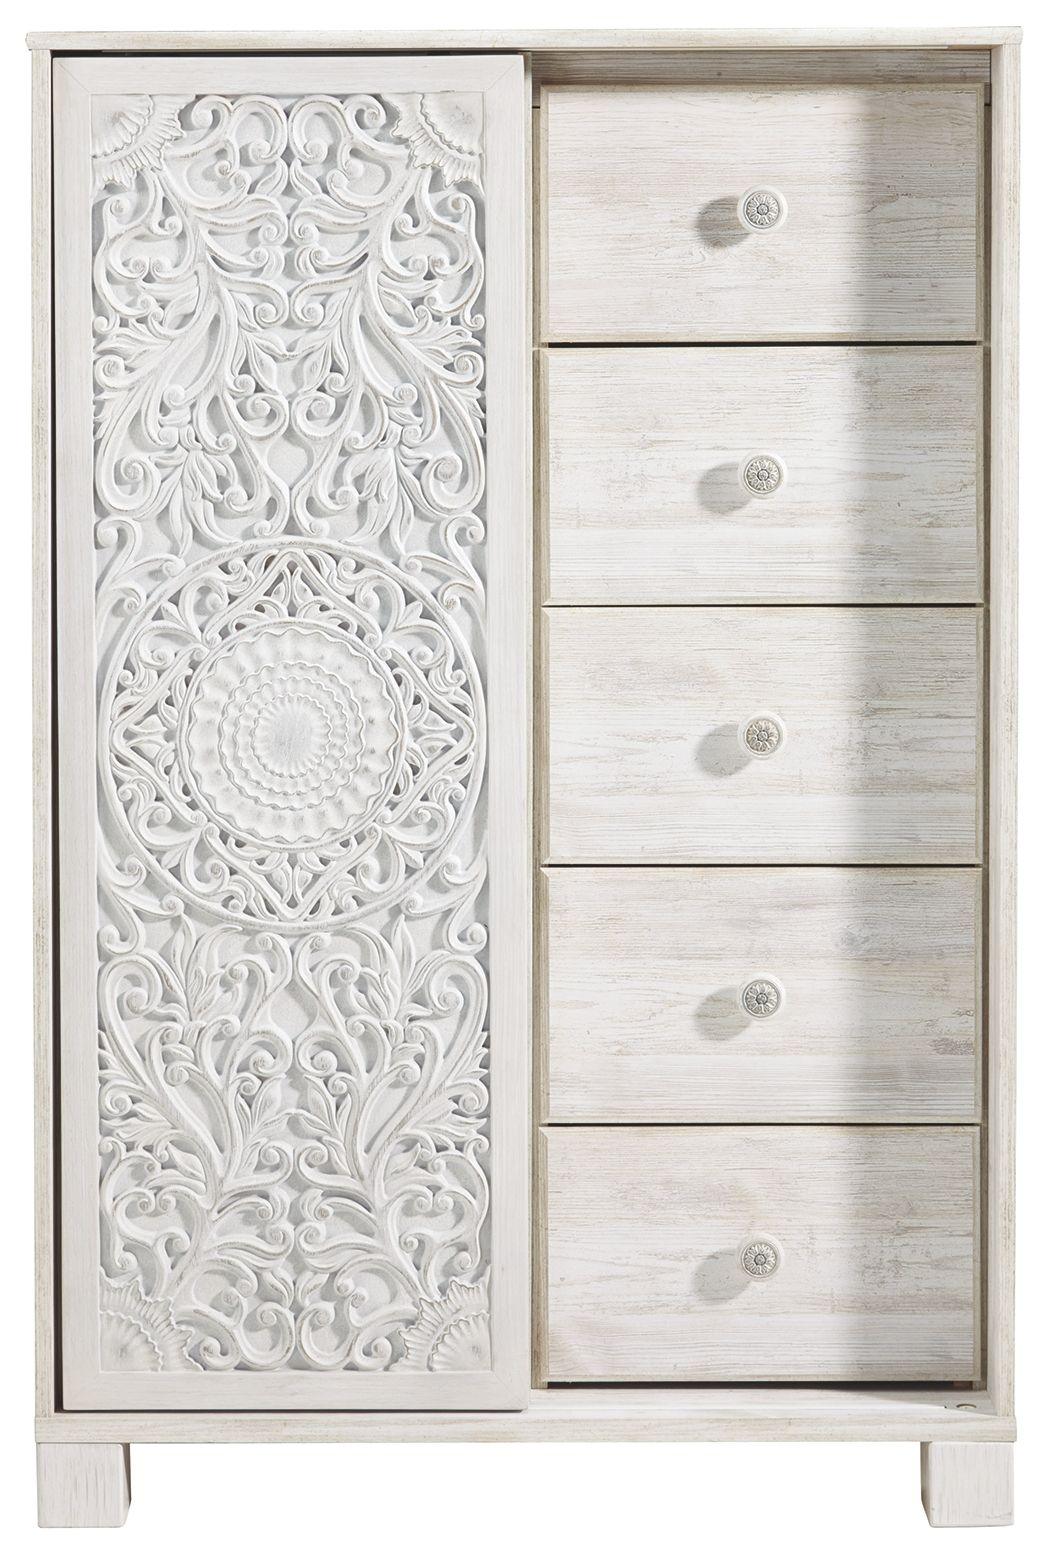 Ashley Furniture - Paxberry - Whitewash - Dressing Chest - 5th Avenue Furniture